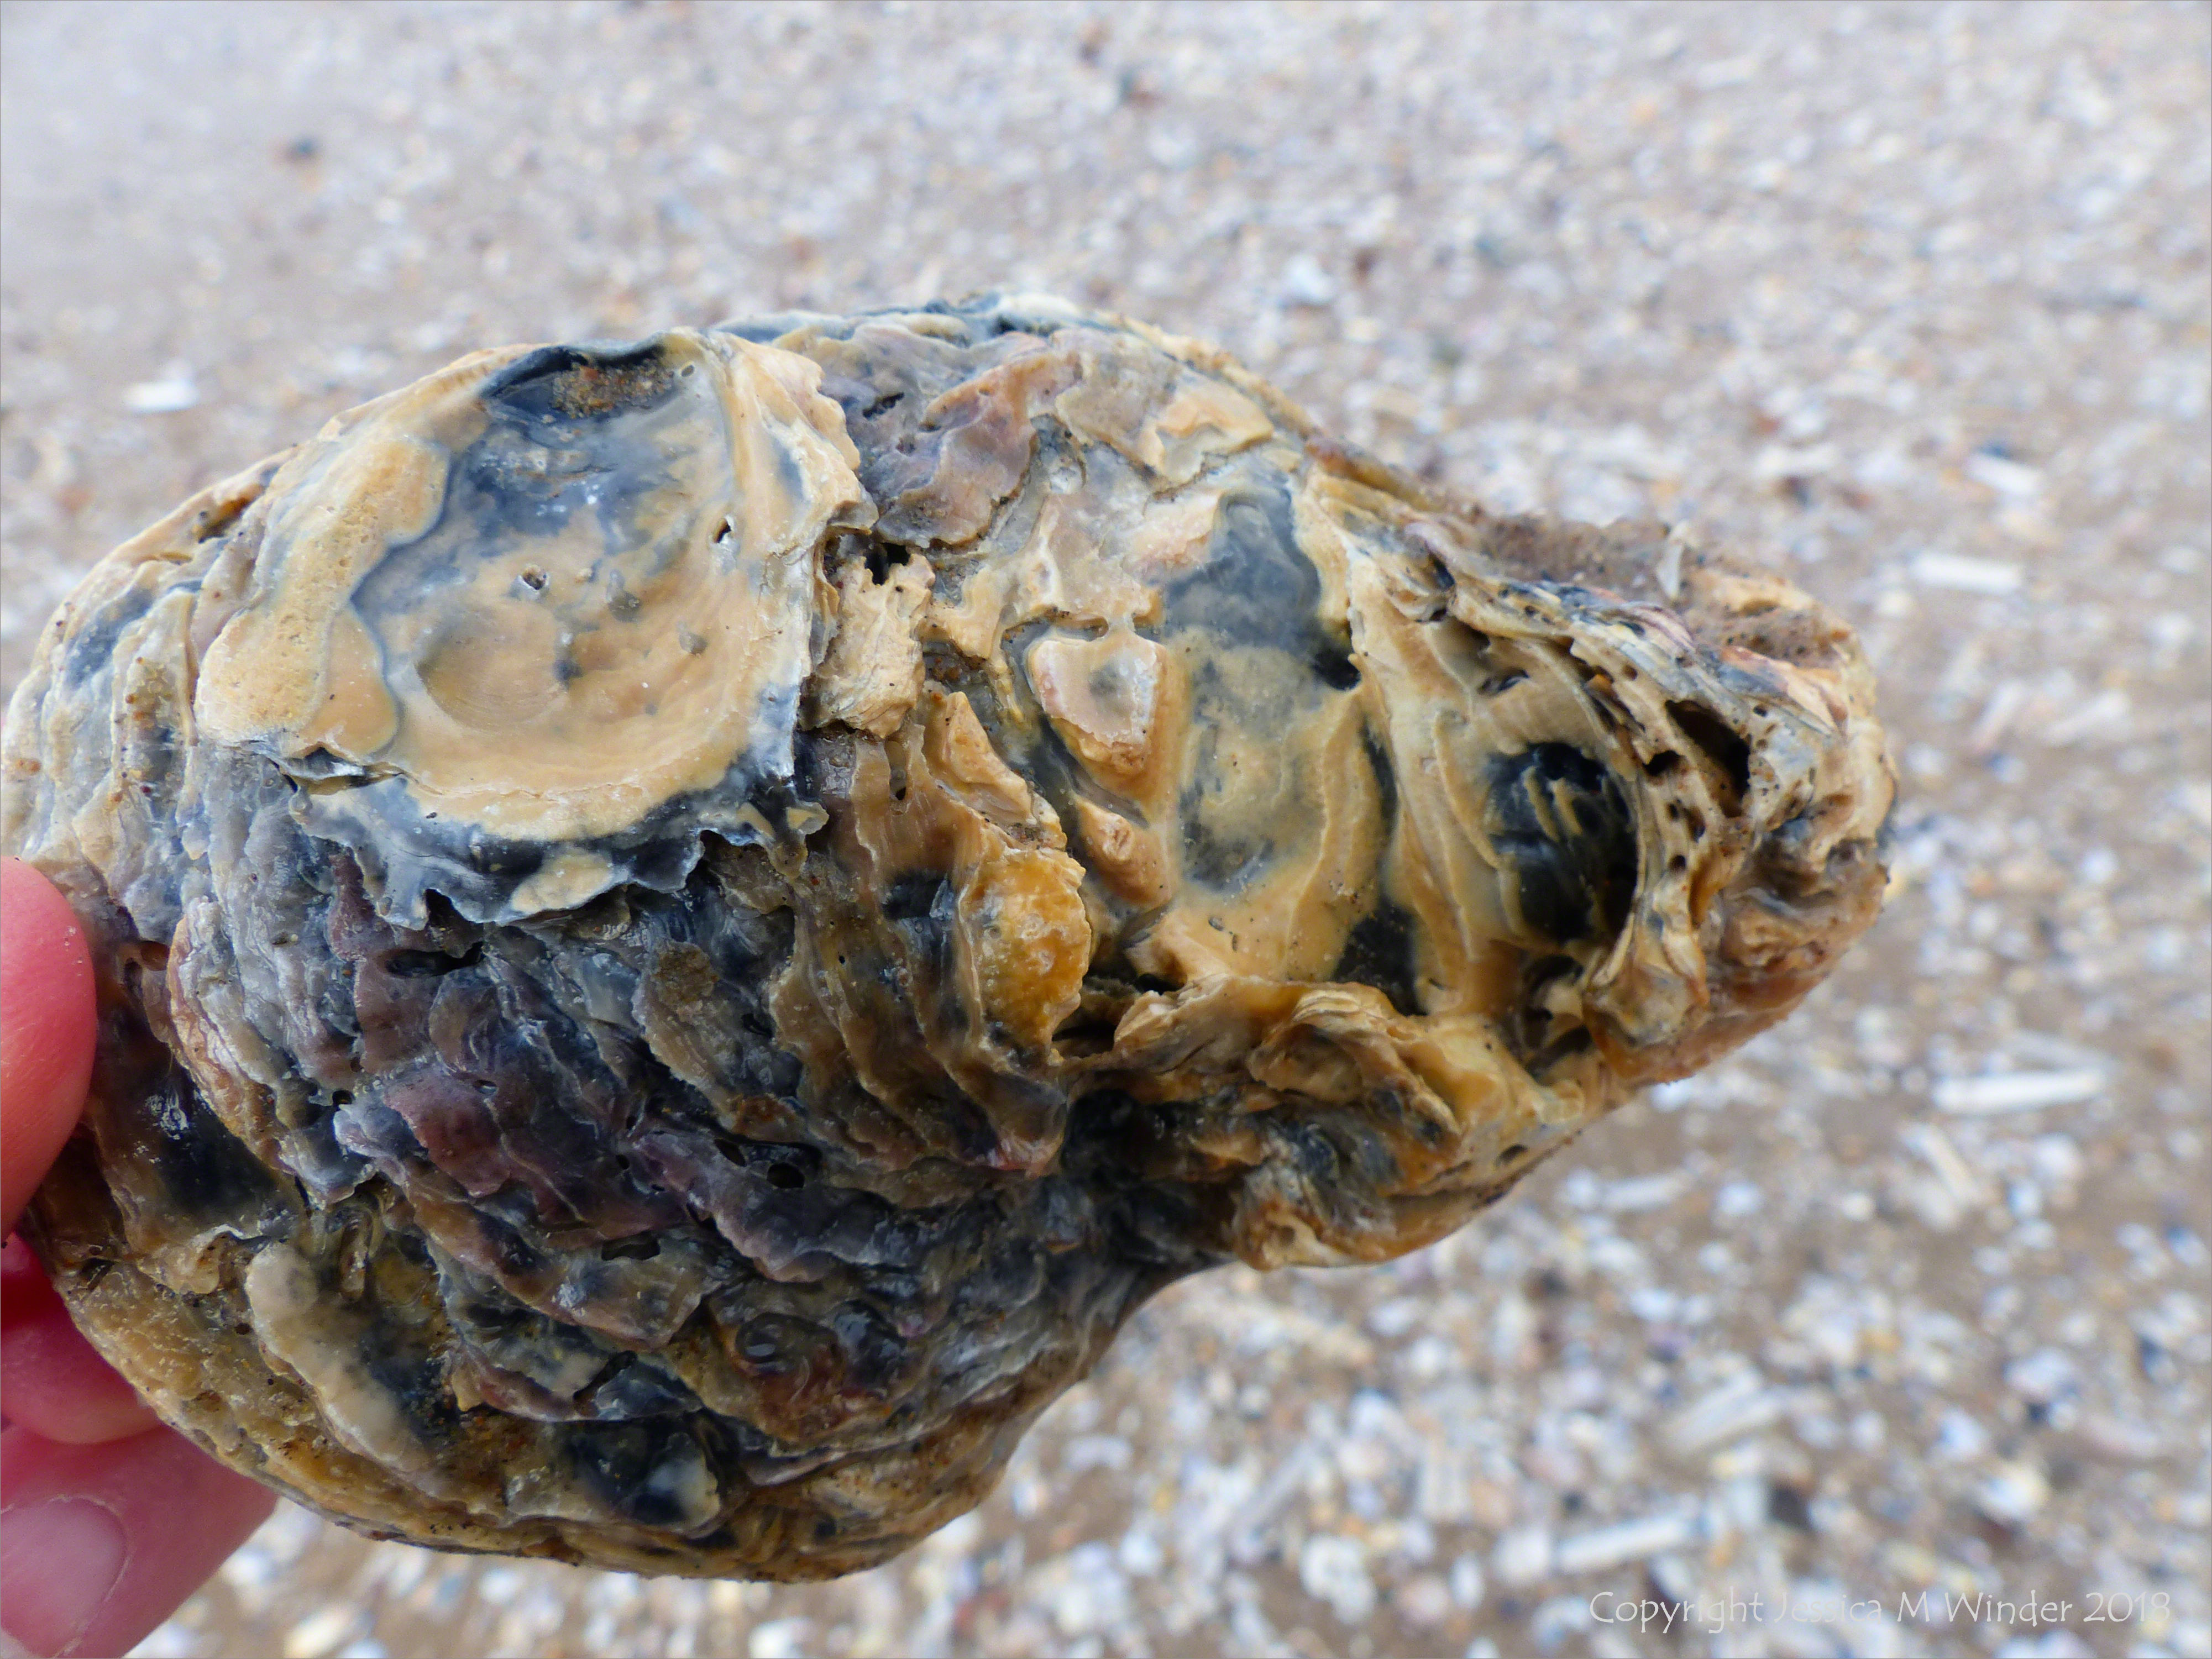 Old oyster shell on the beach - oyster shell variations